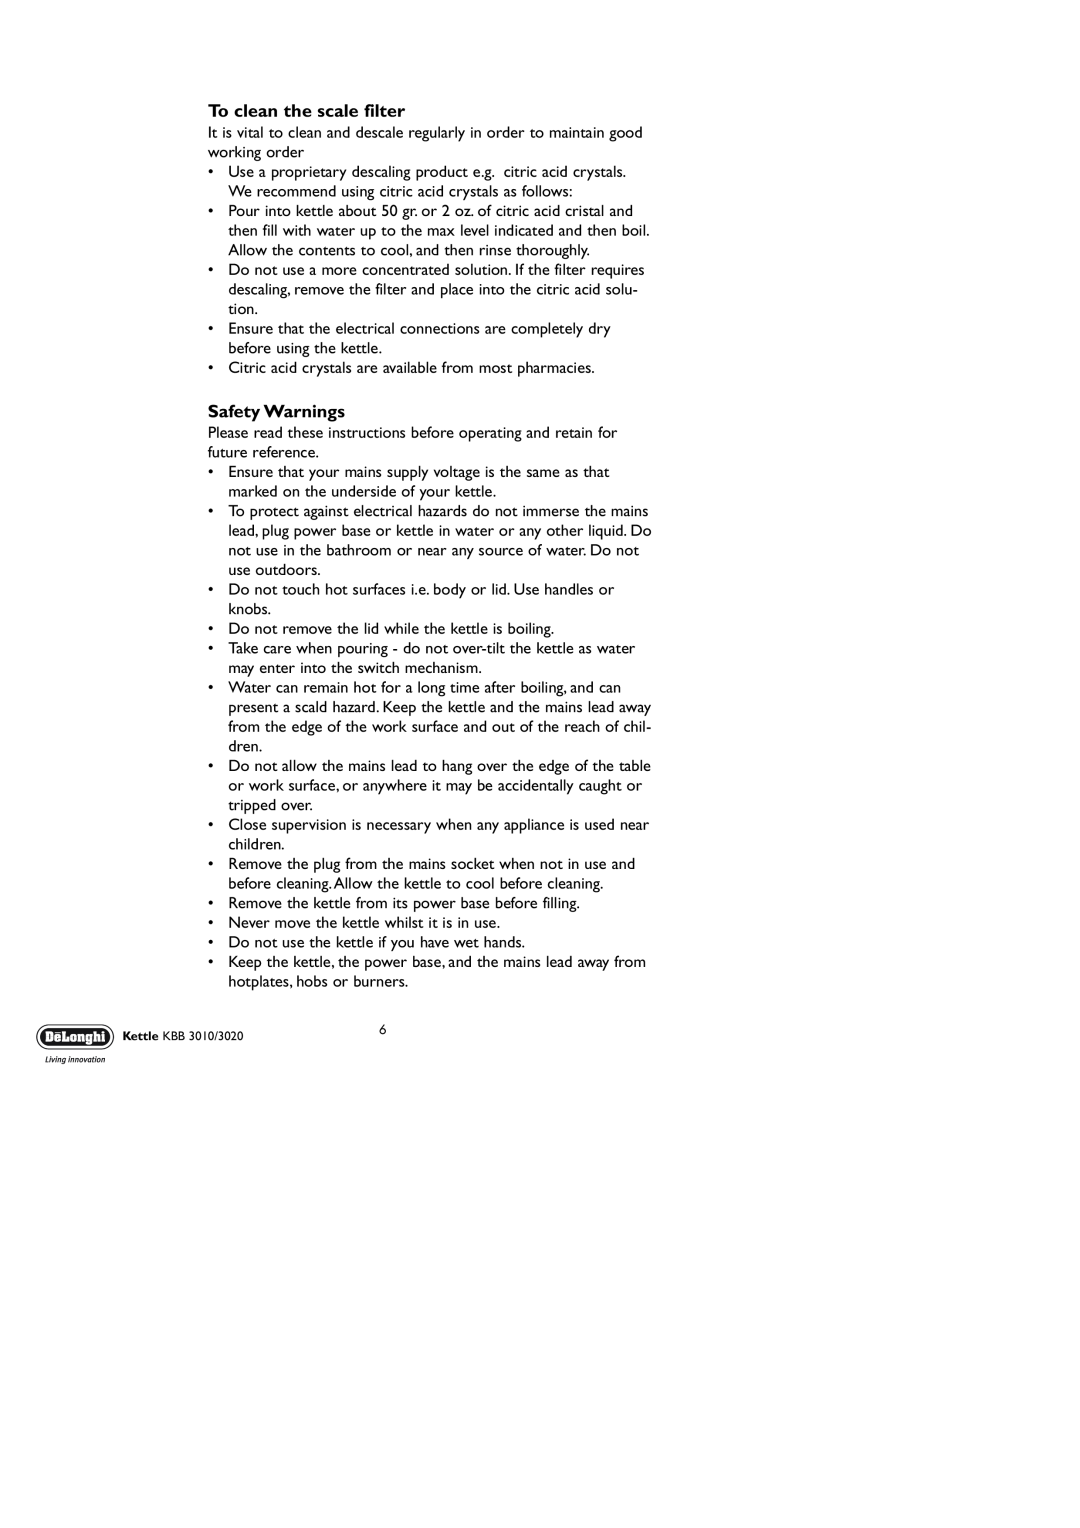 DeLonghi KBB 3010, KBB 3020 manual To clean the scale filter, Safety Warnings 